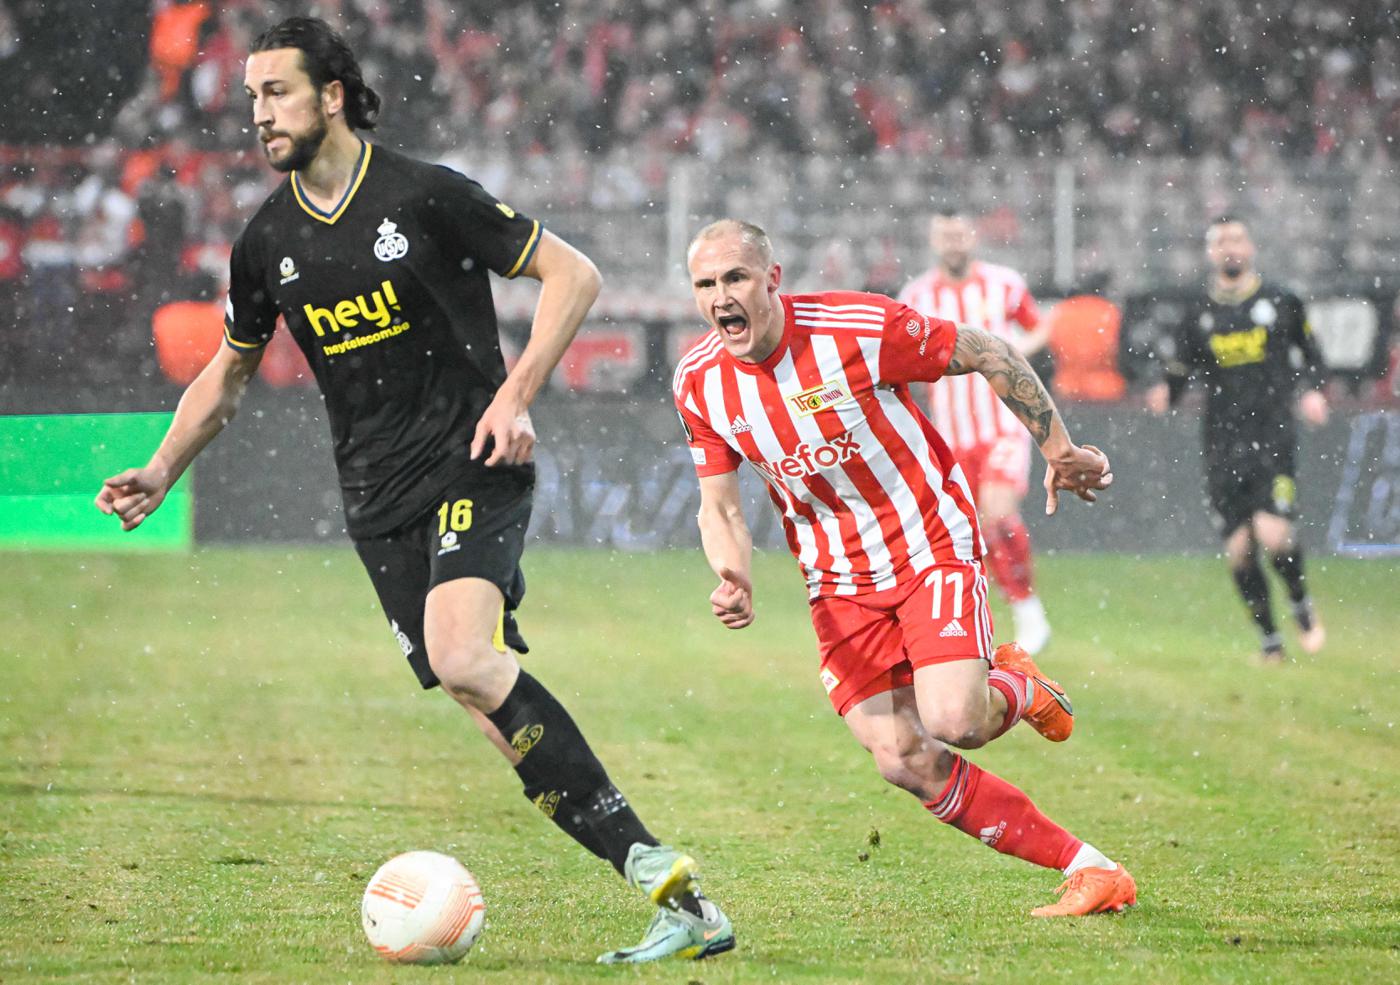 Union St. Gilloise - 3:3. Europa League. Review of the match, statistics.